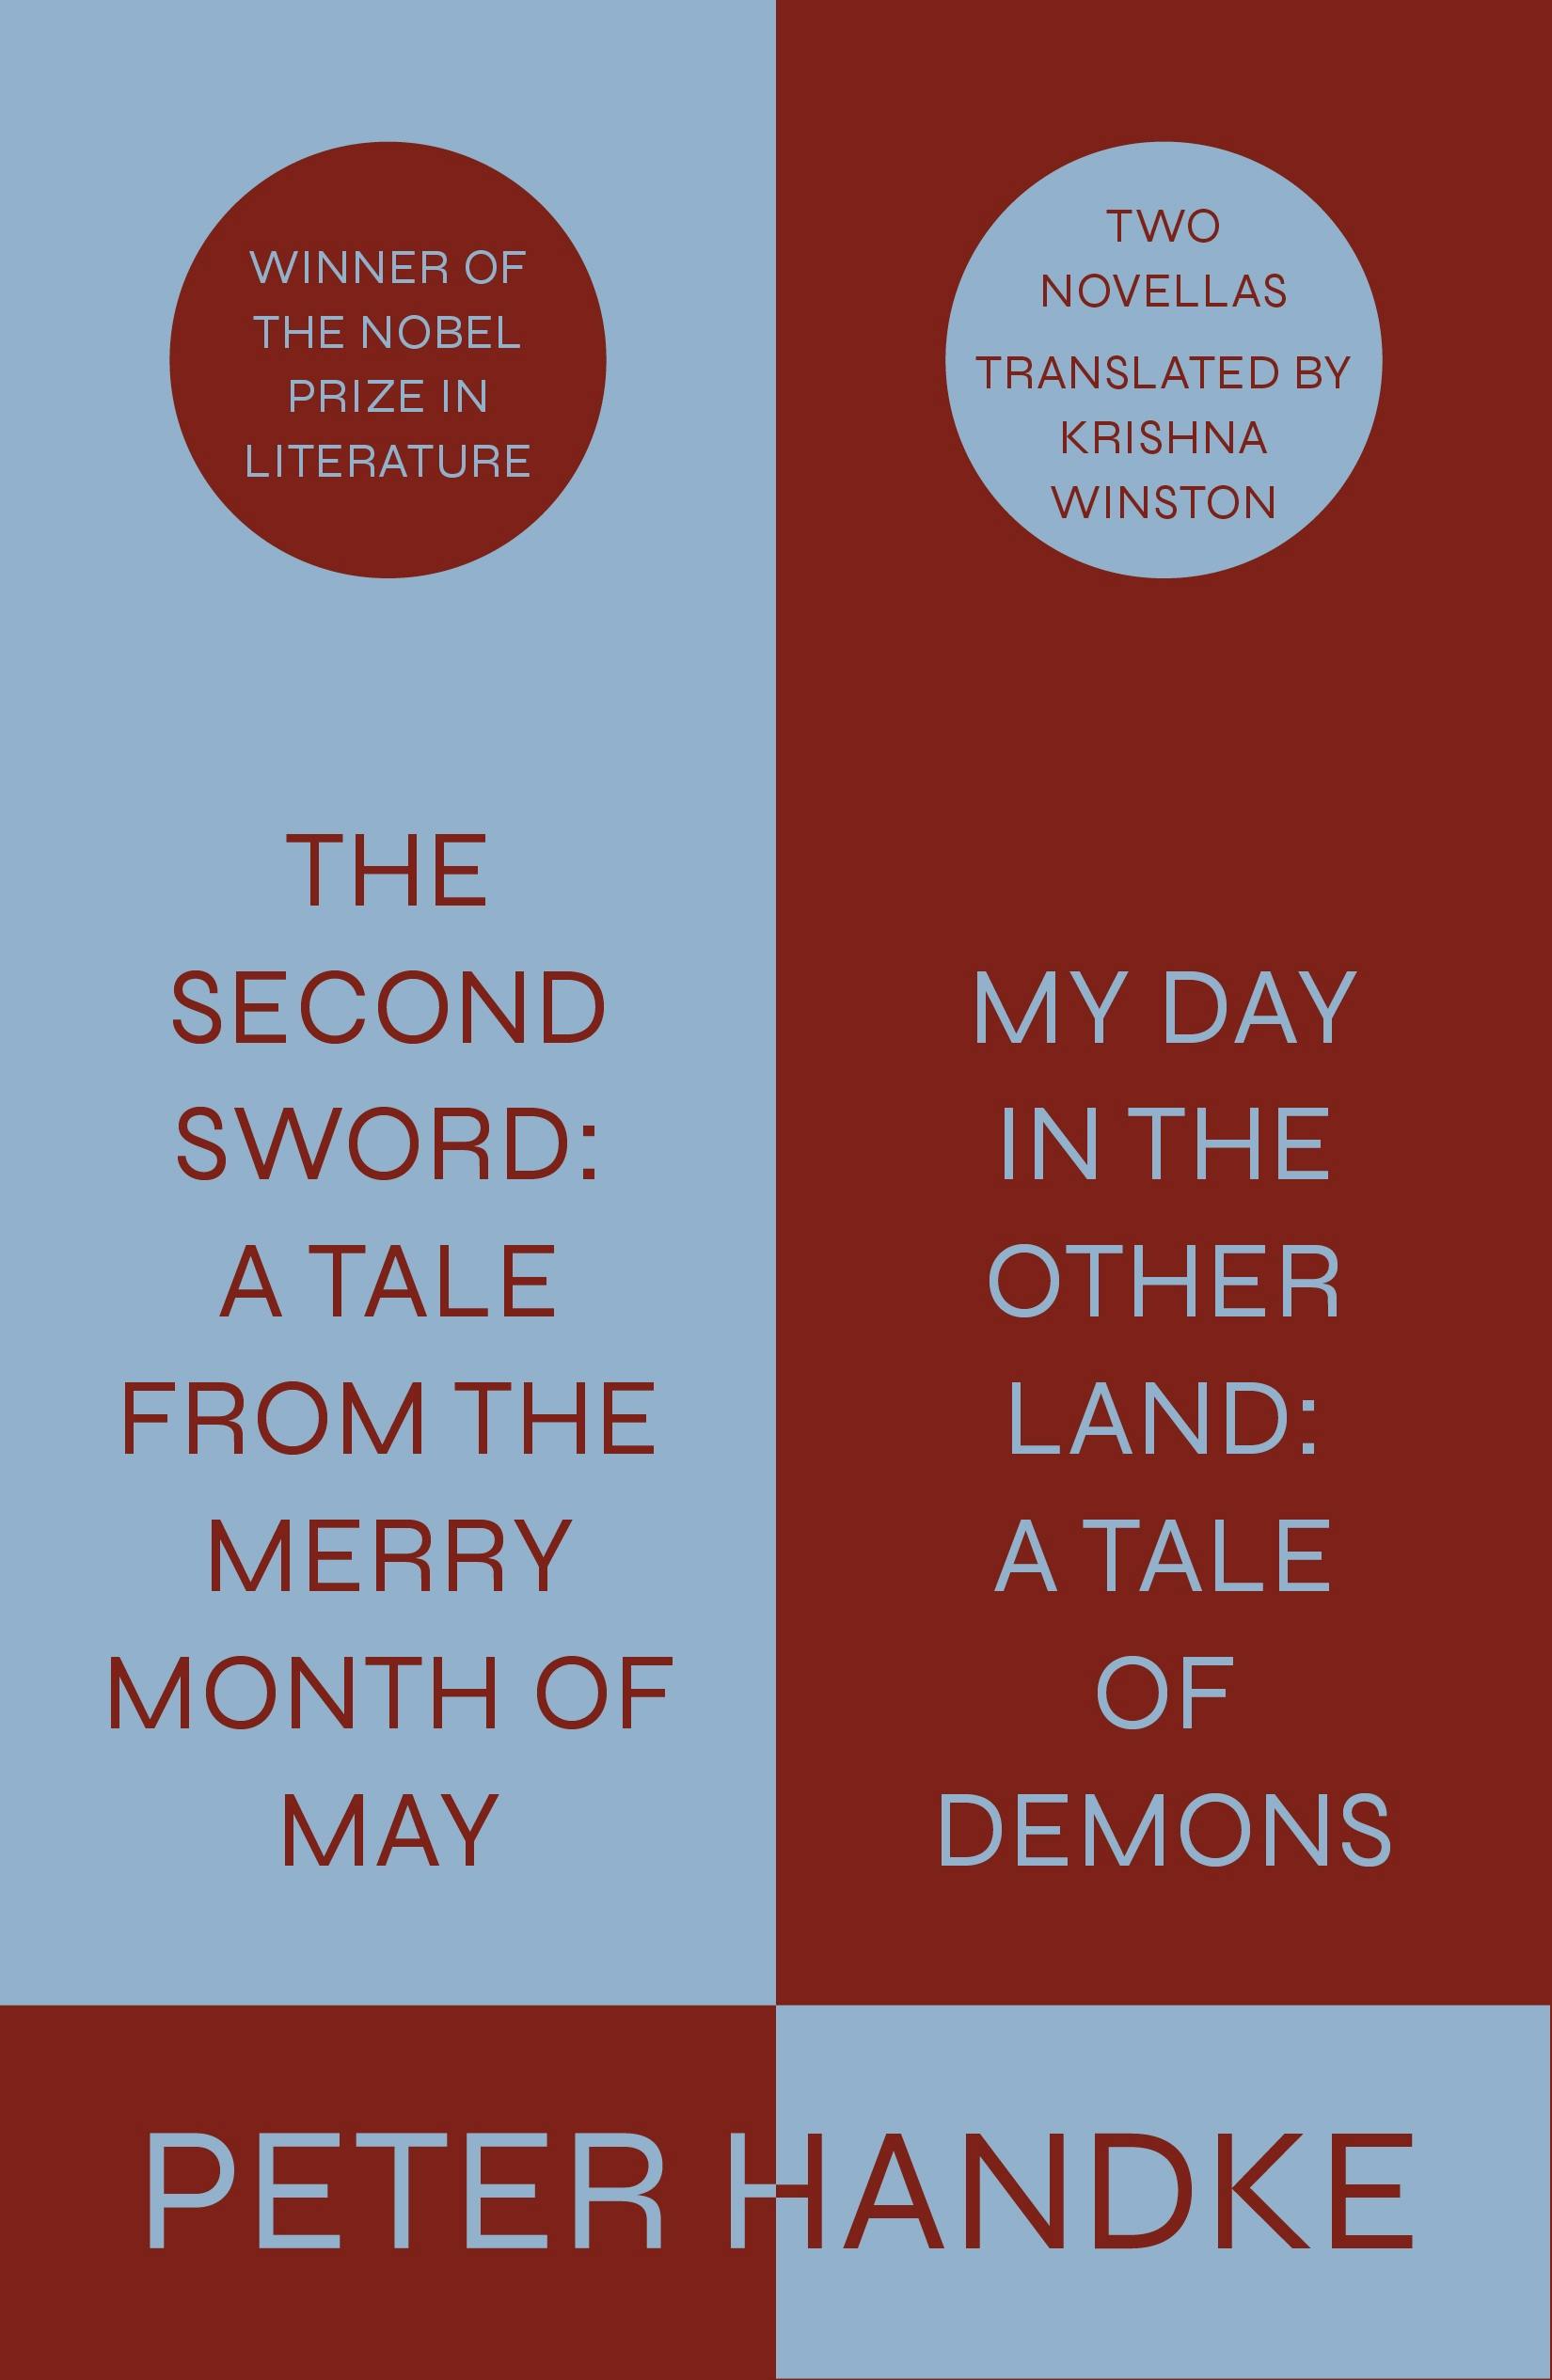 The Second Sword: A Tale from the Merry Month of May, and My Day